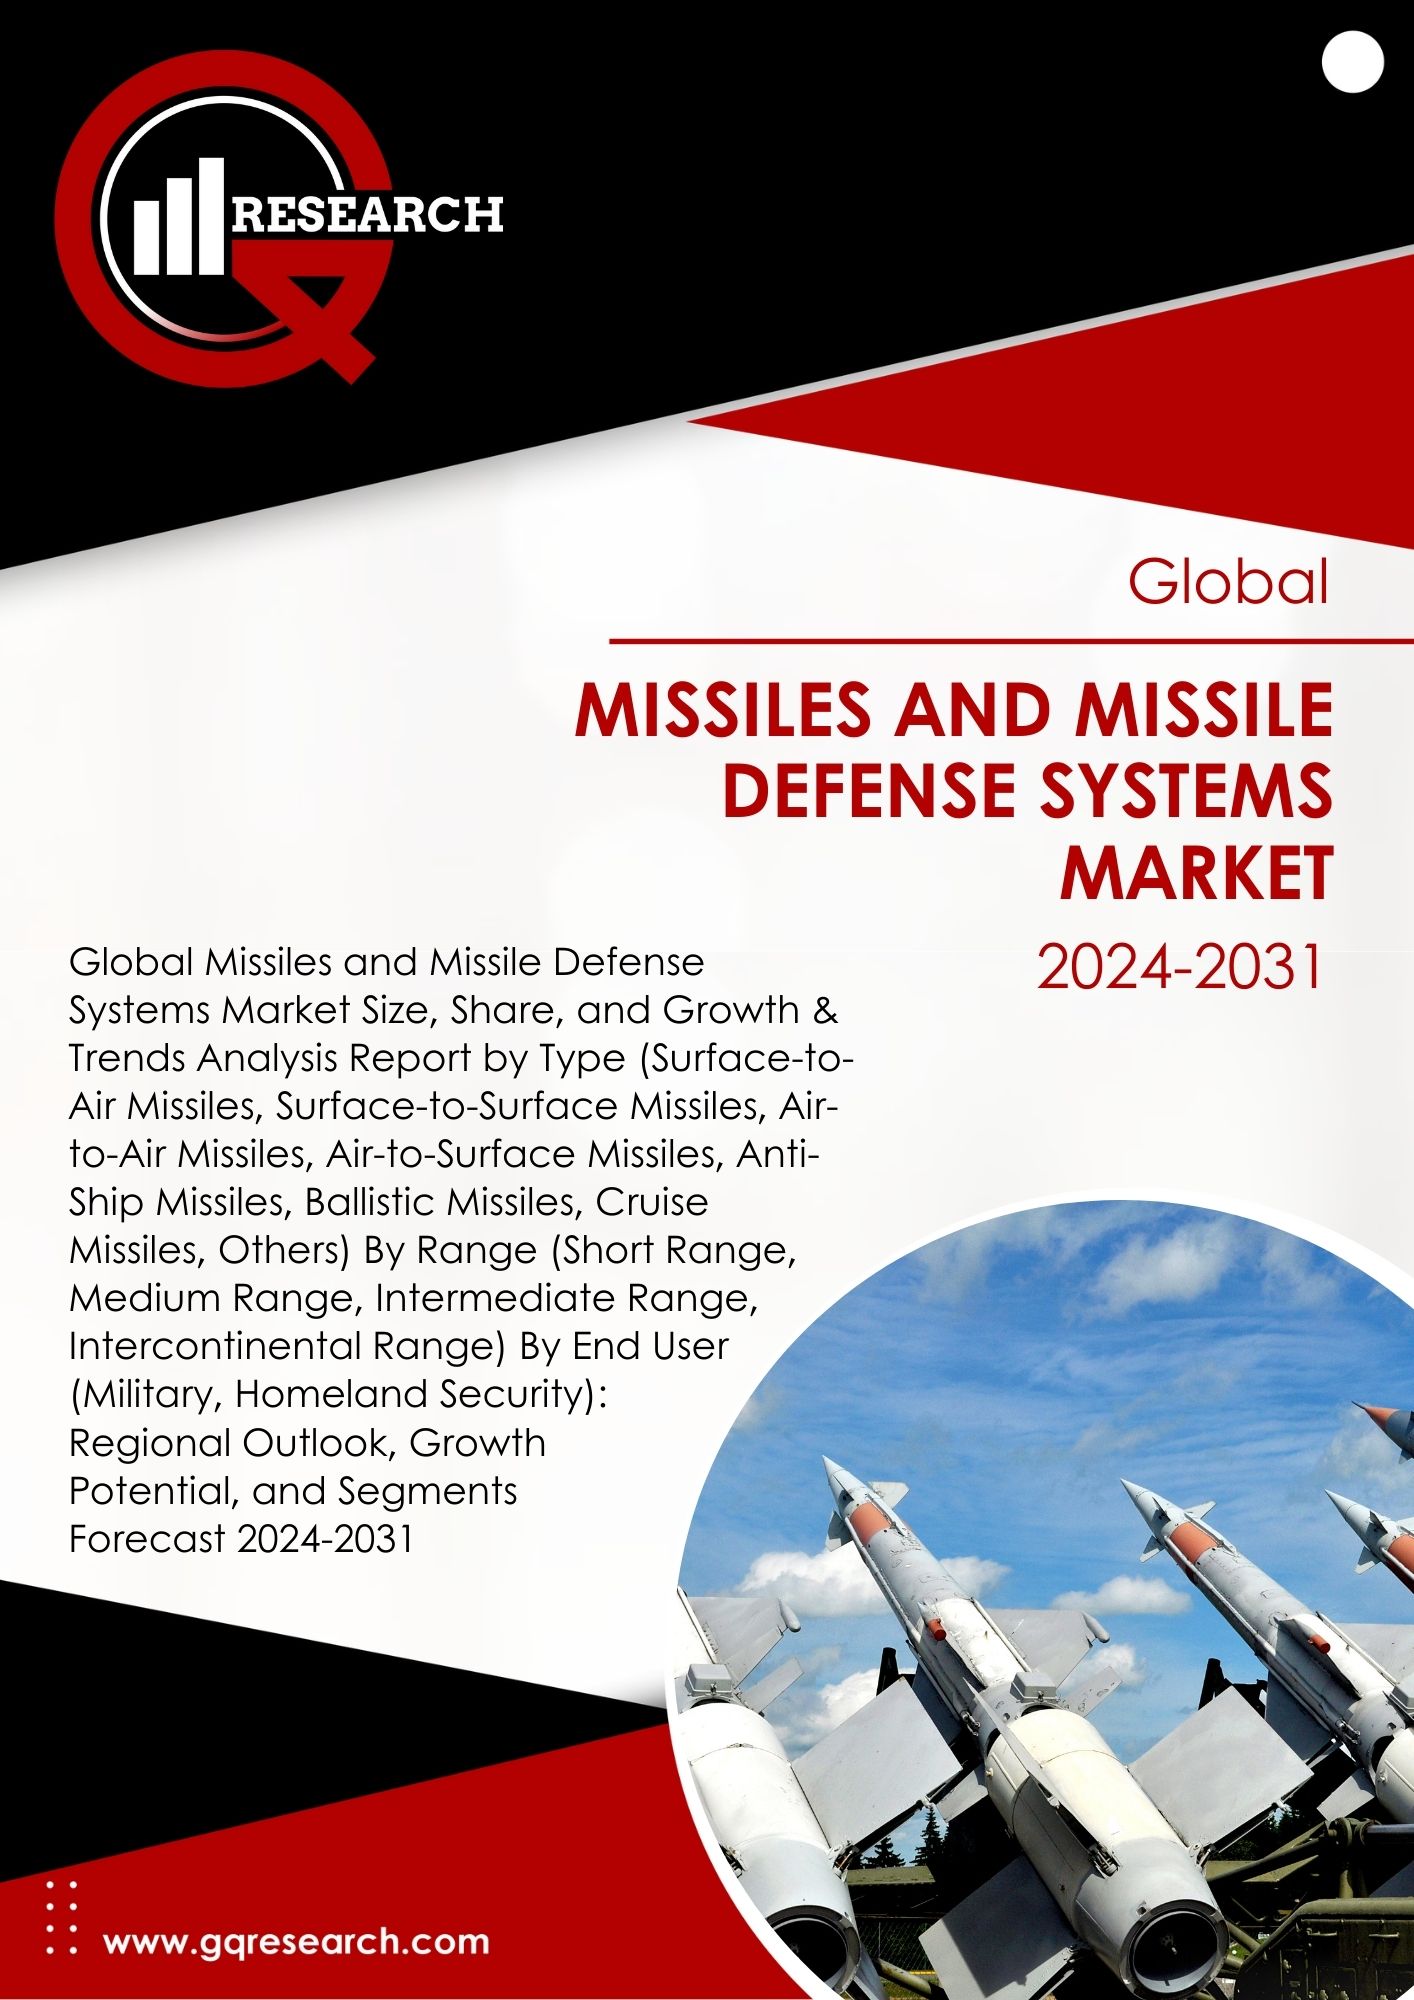 Missiles and Missile Defense Systems Market Growth, Size and Share Analysis by 2031 | GQ Research